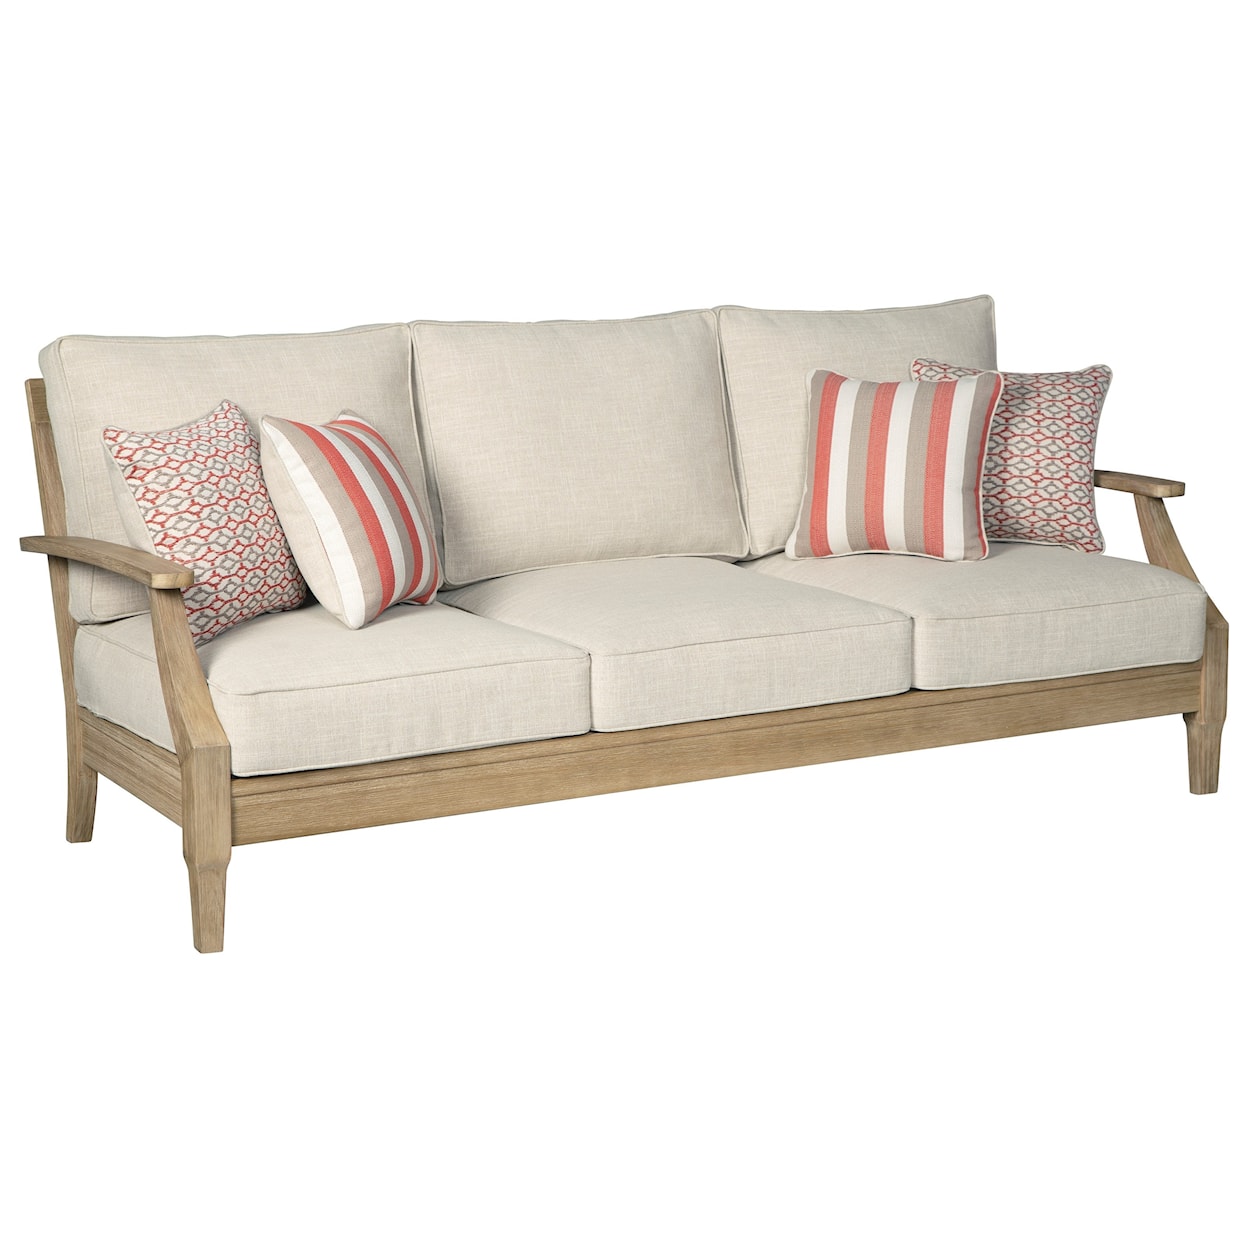 Signature Design by Ashley Clare View Sofa with Cushion